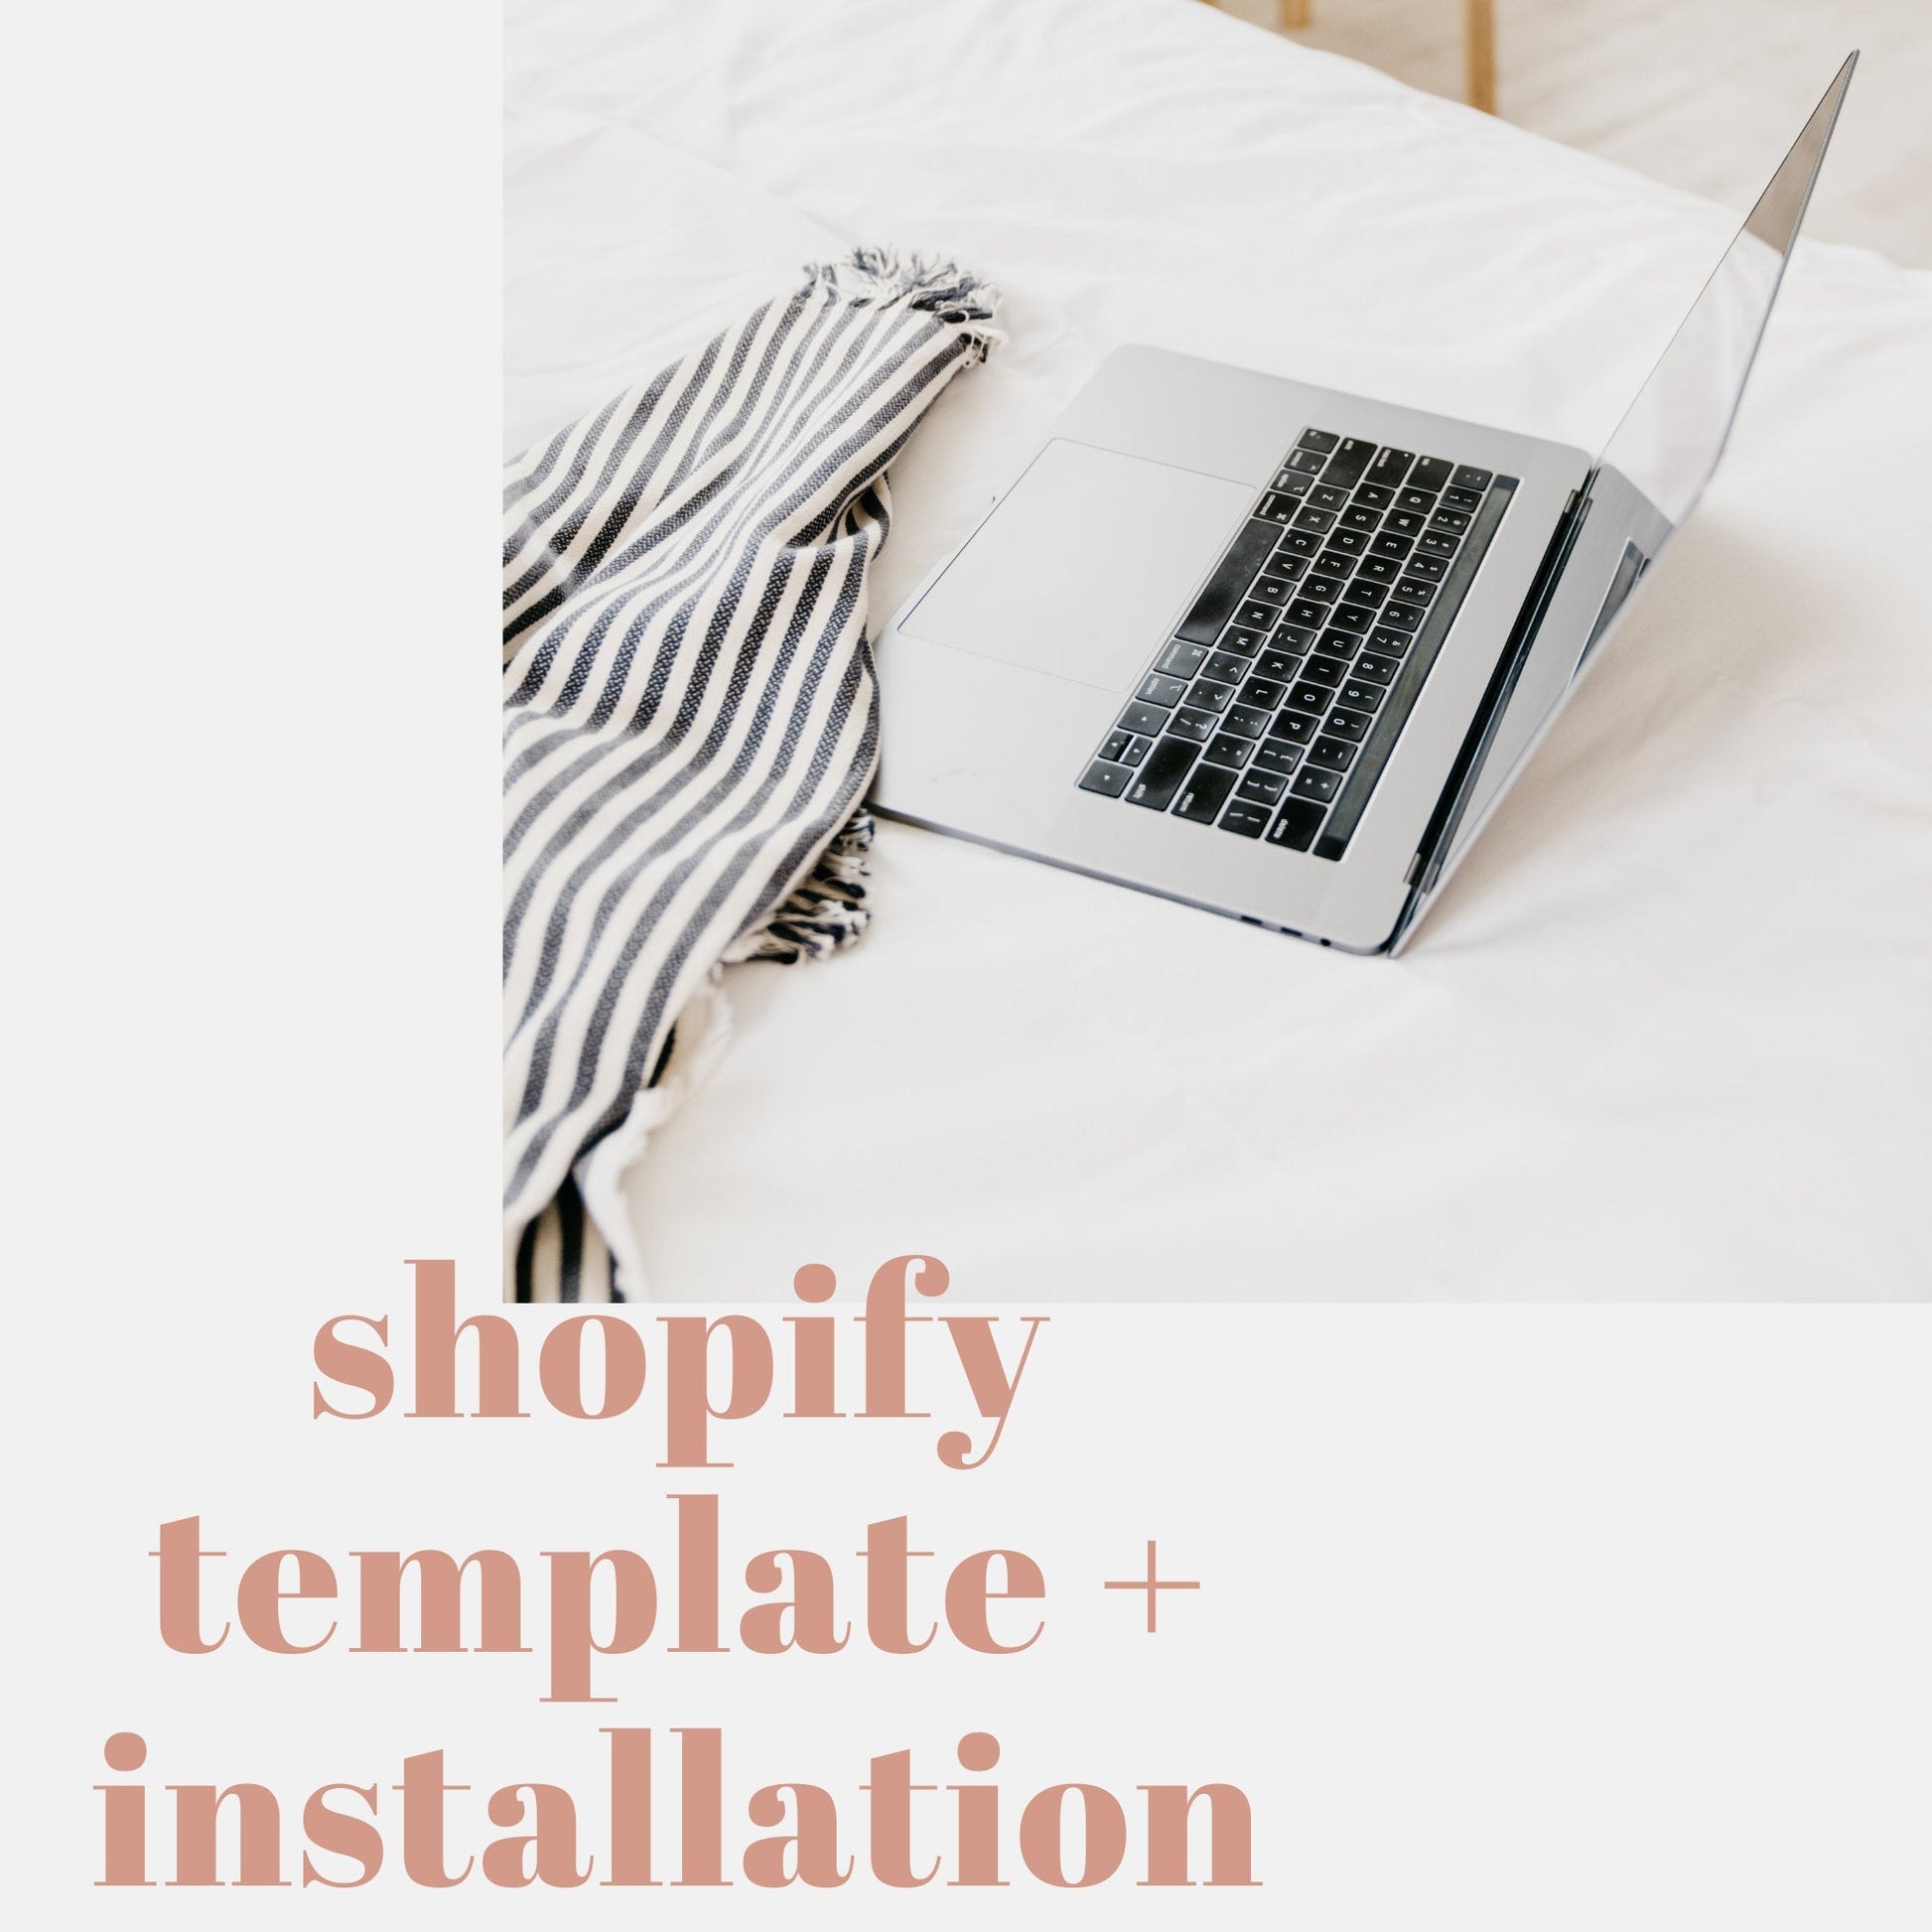 Shopify Template and Installation | Shopify Theme | Shopify Design | Easy Shopify Theme Design